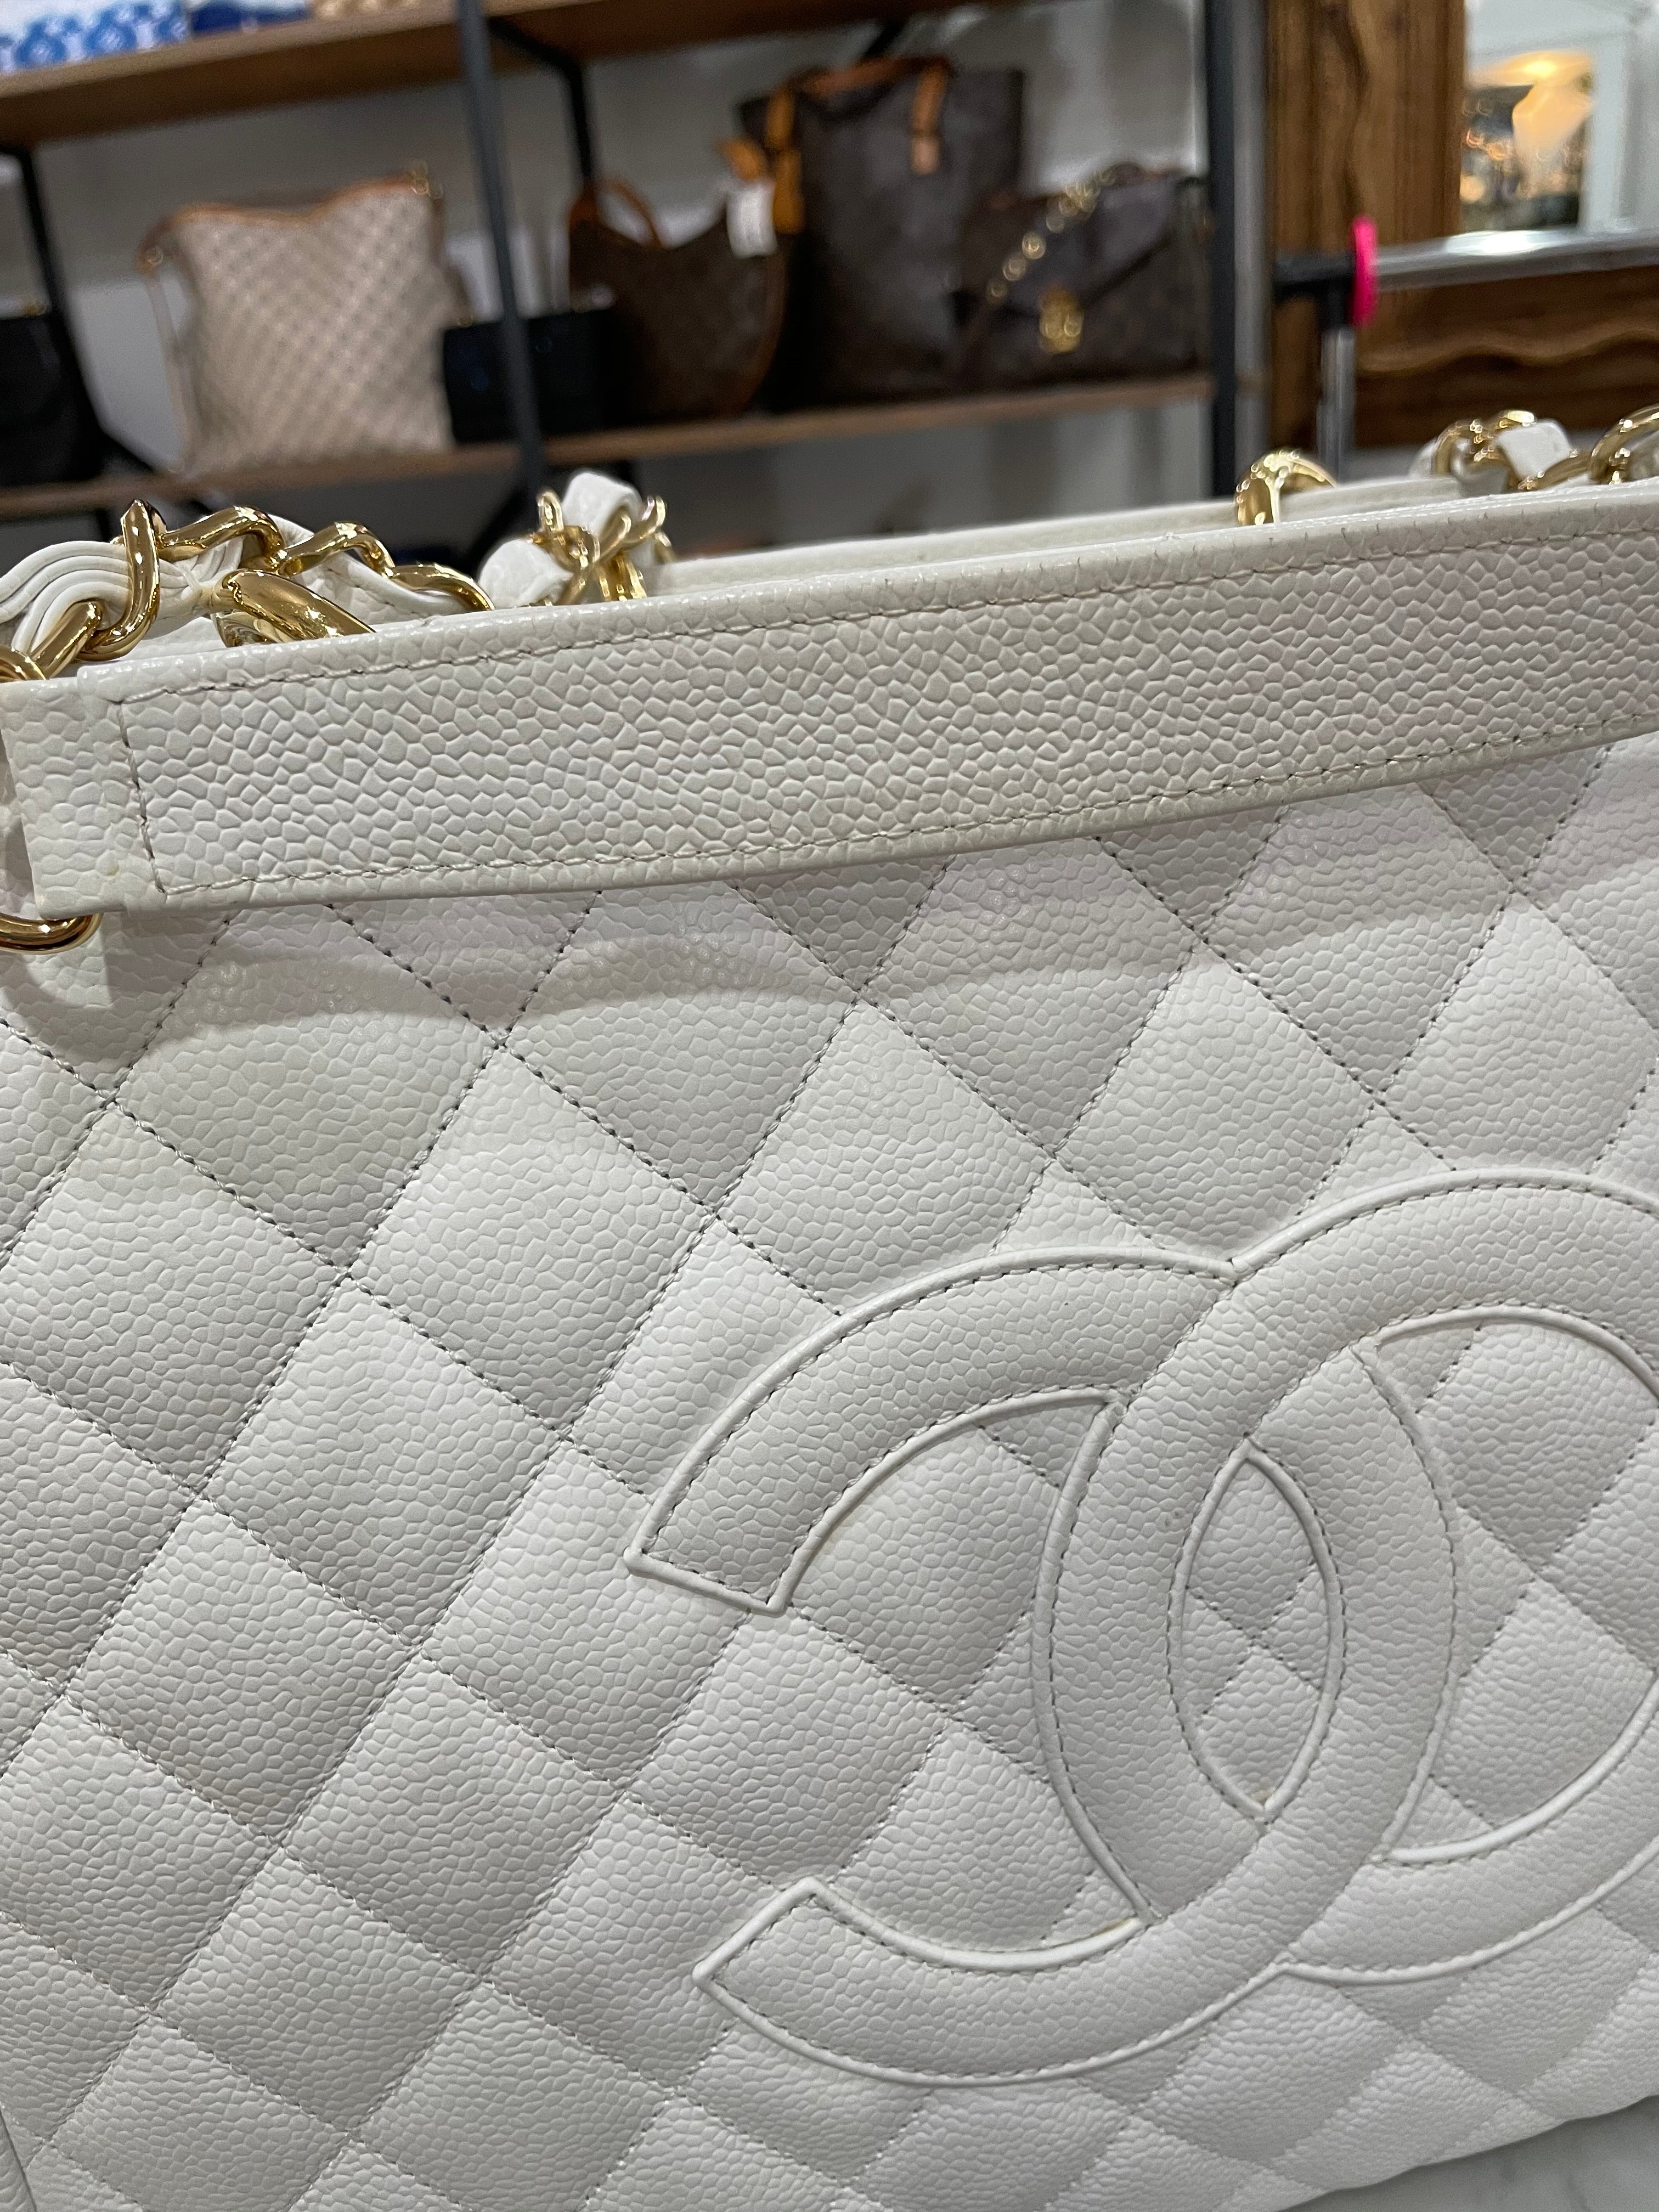 chanel bag with stones